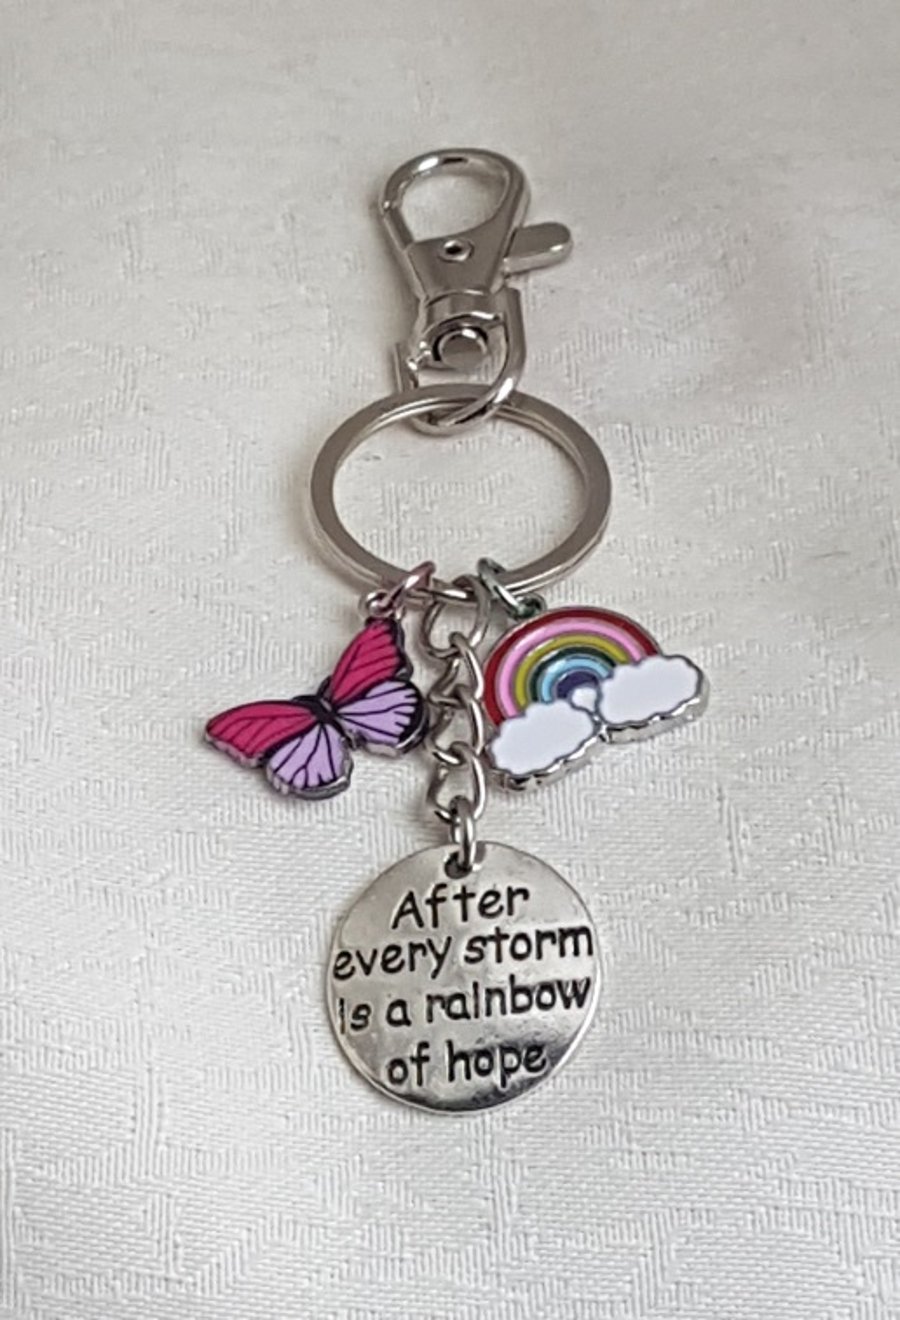 Inspirational After Every Storm Key ring - Bag Charm - Key Chain.